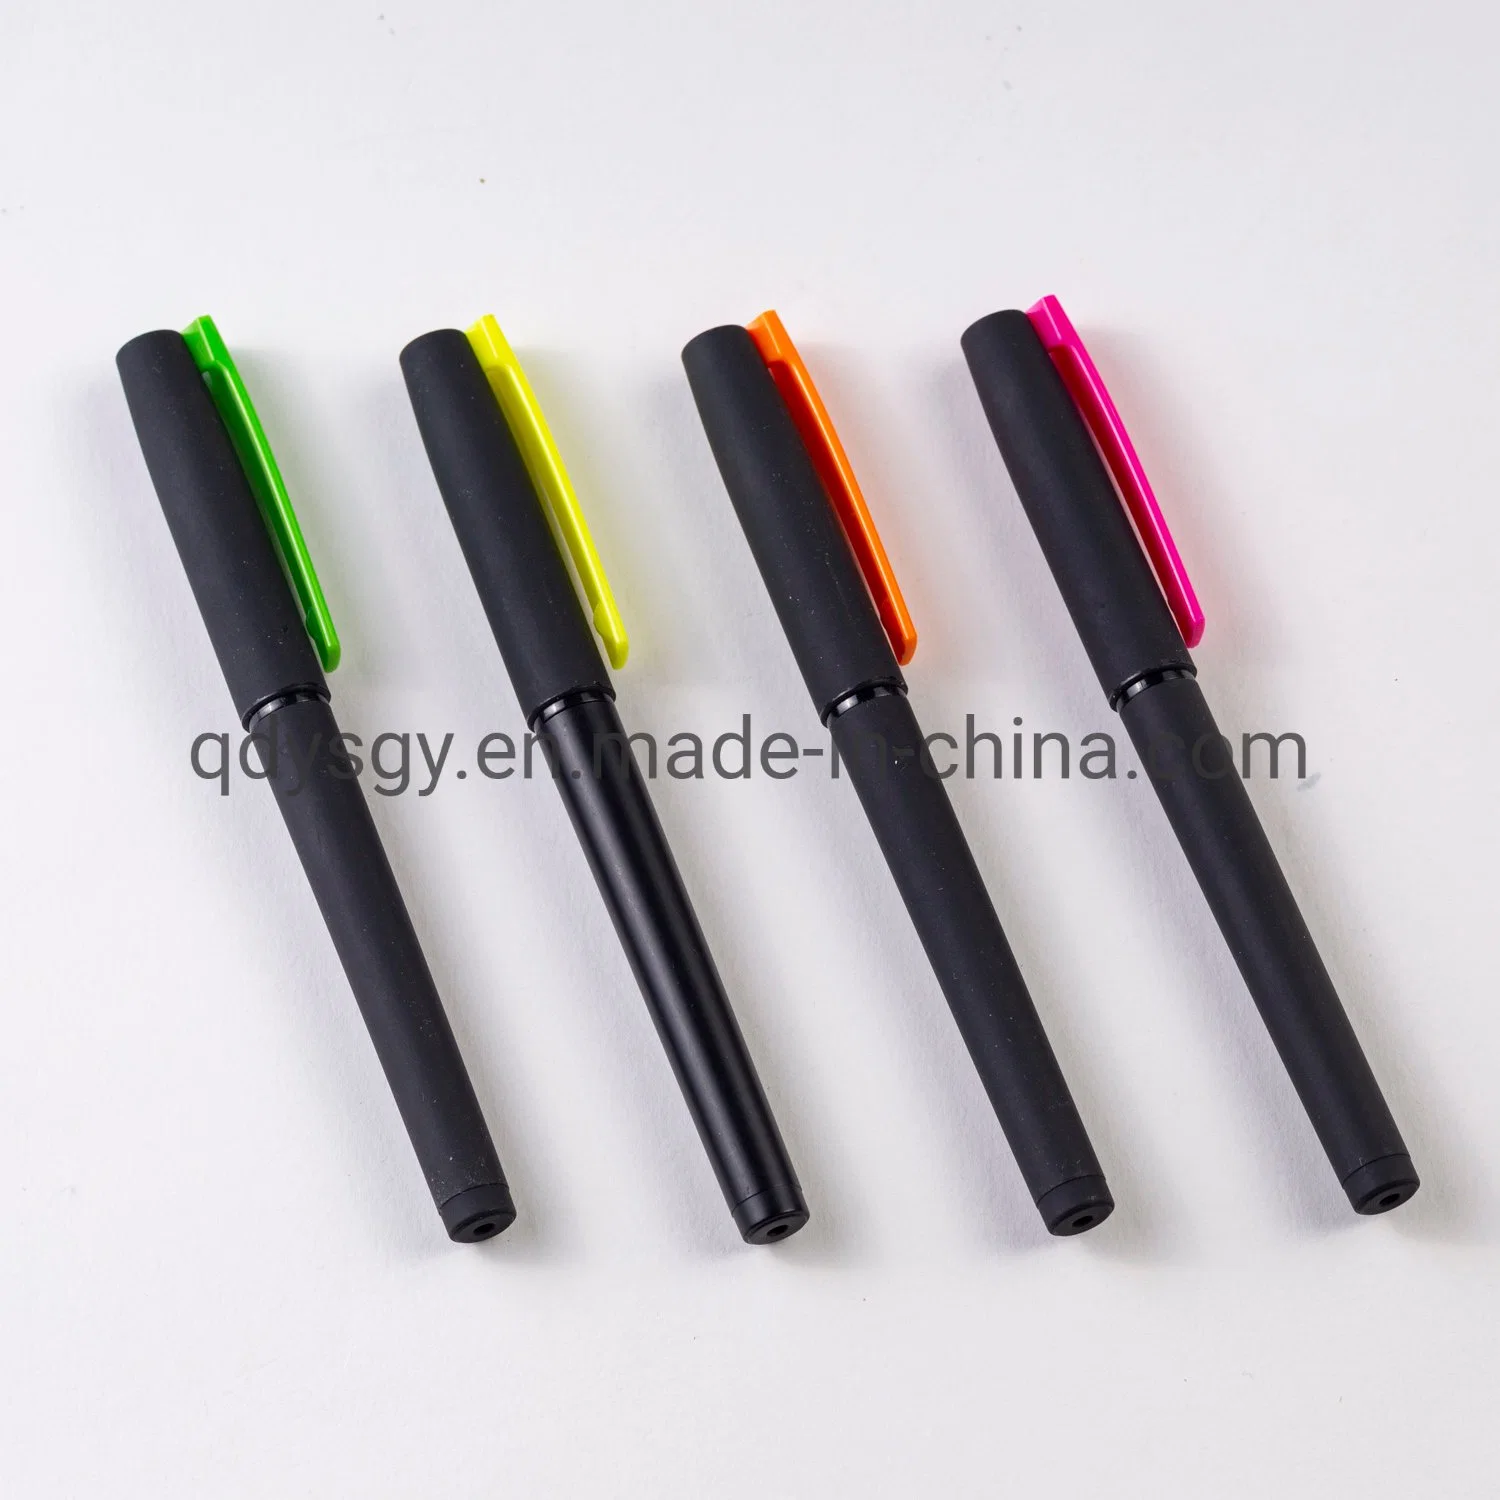 Promotion Gift with High-Quality Gel Pen